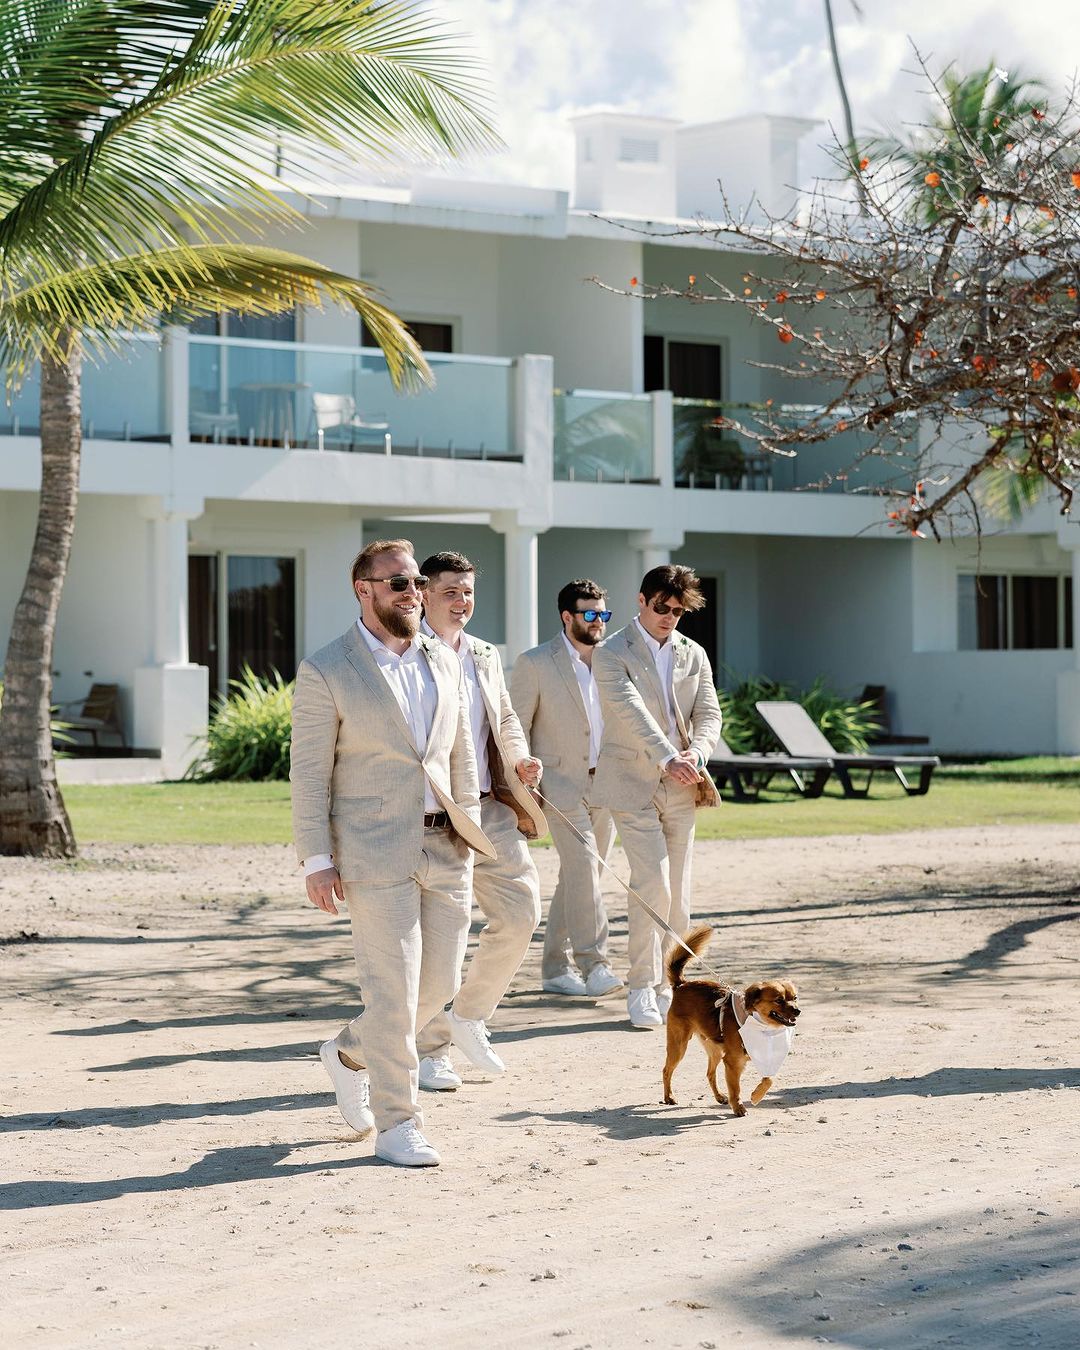 dog and four guys in a suits